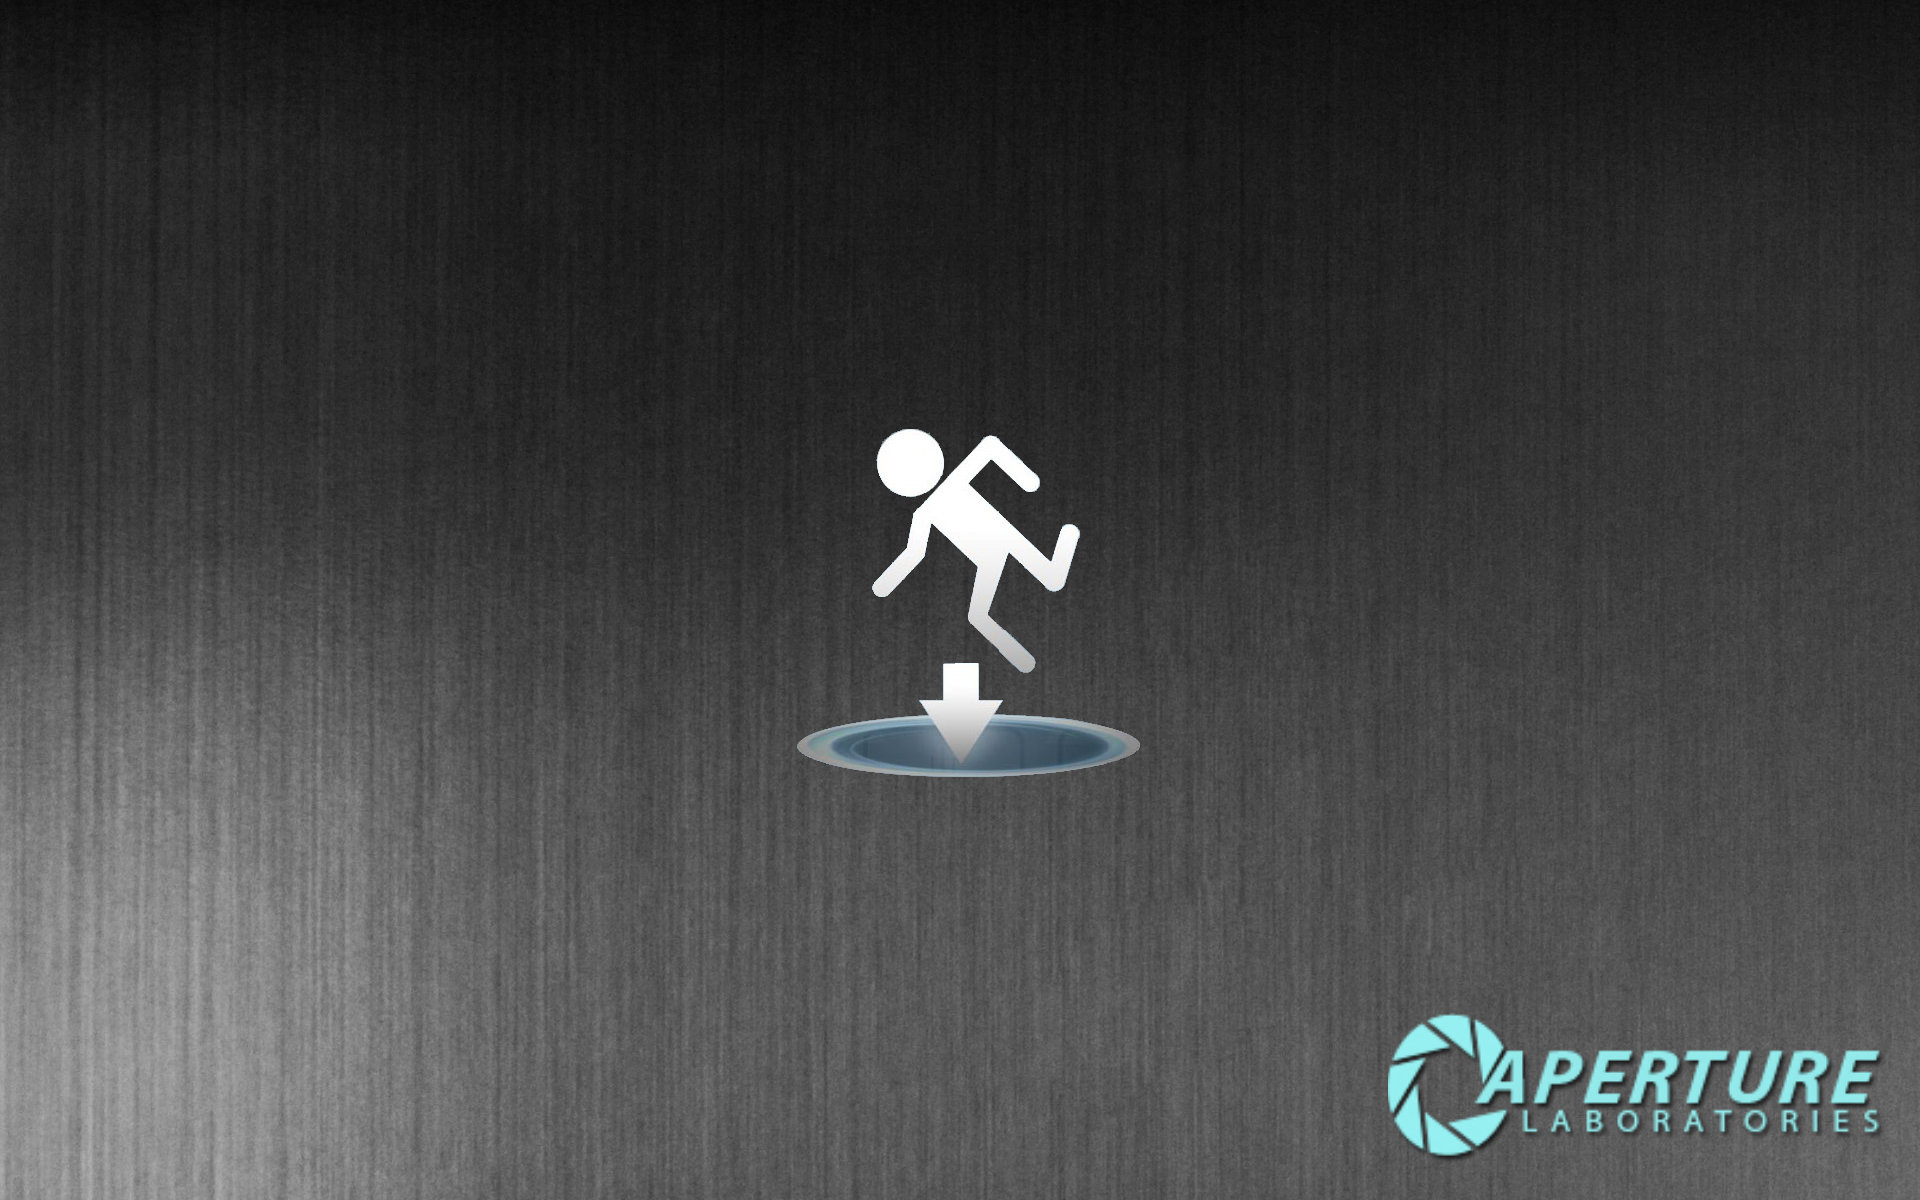 aperture science wallpaper 4 by robcoxxy customization wallpaper hdtv